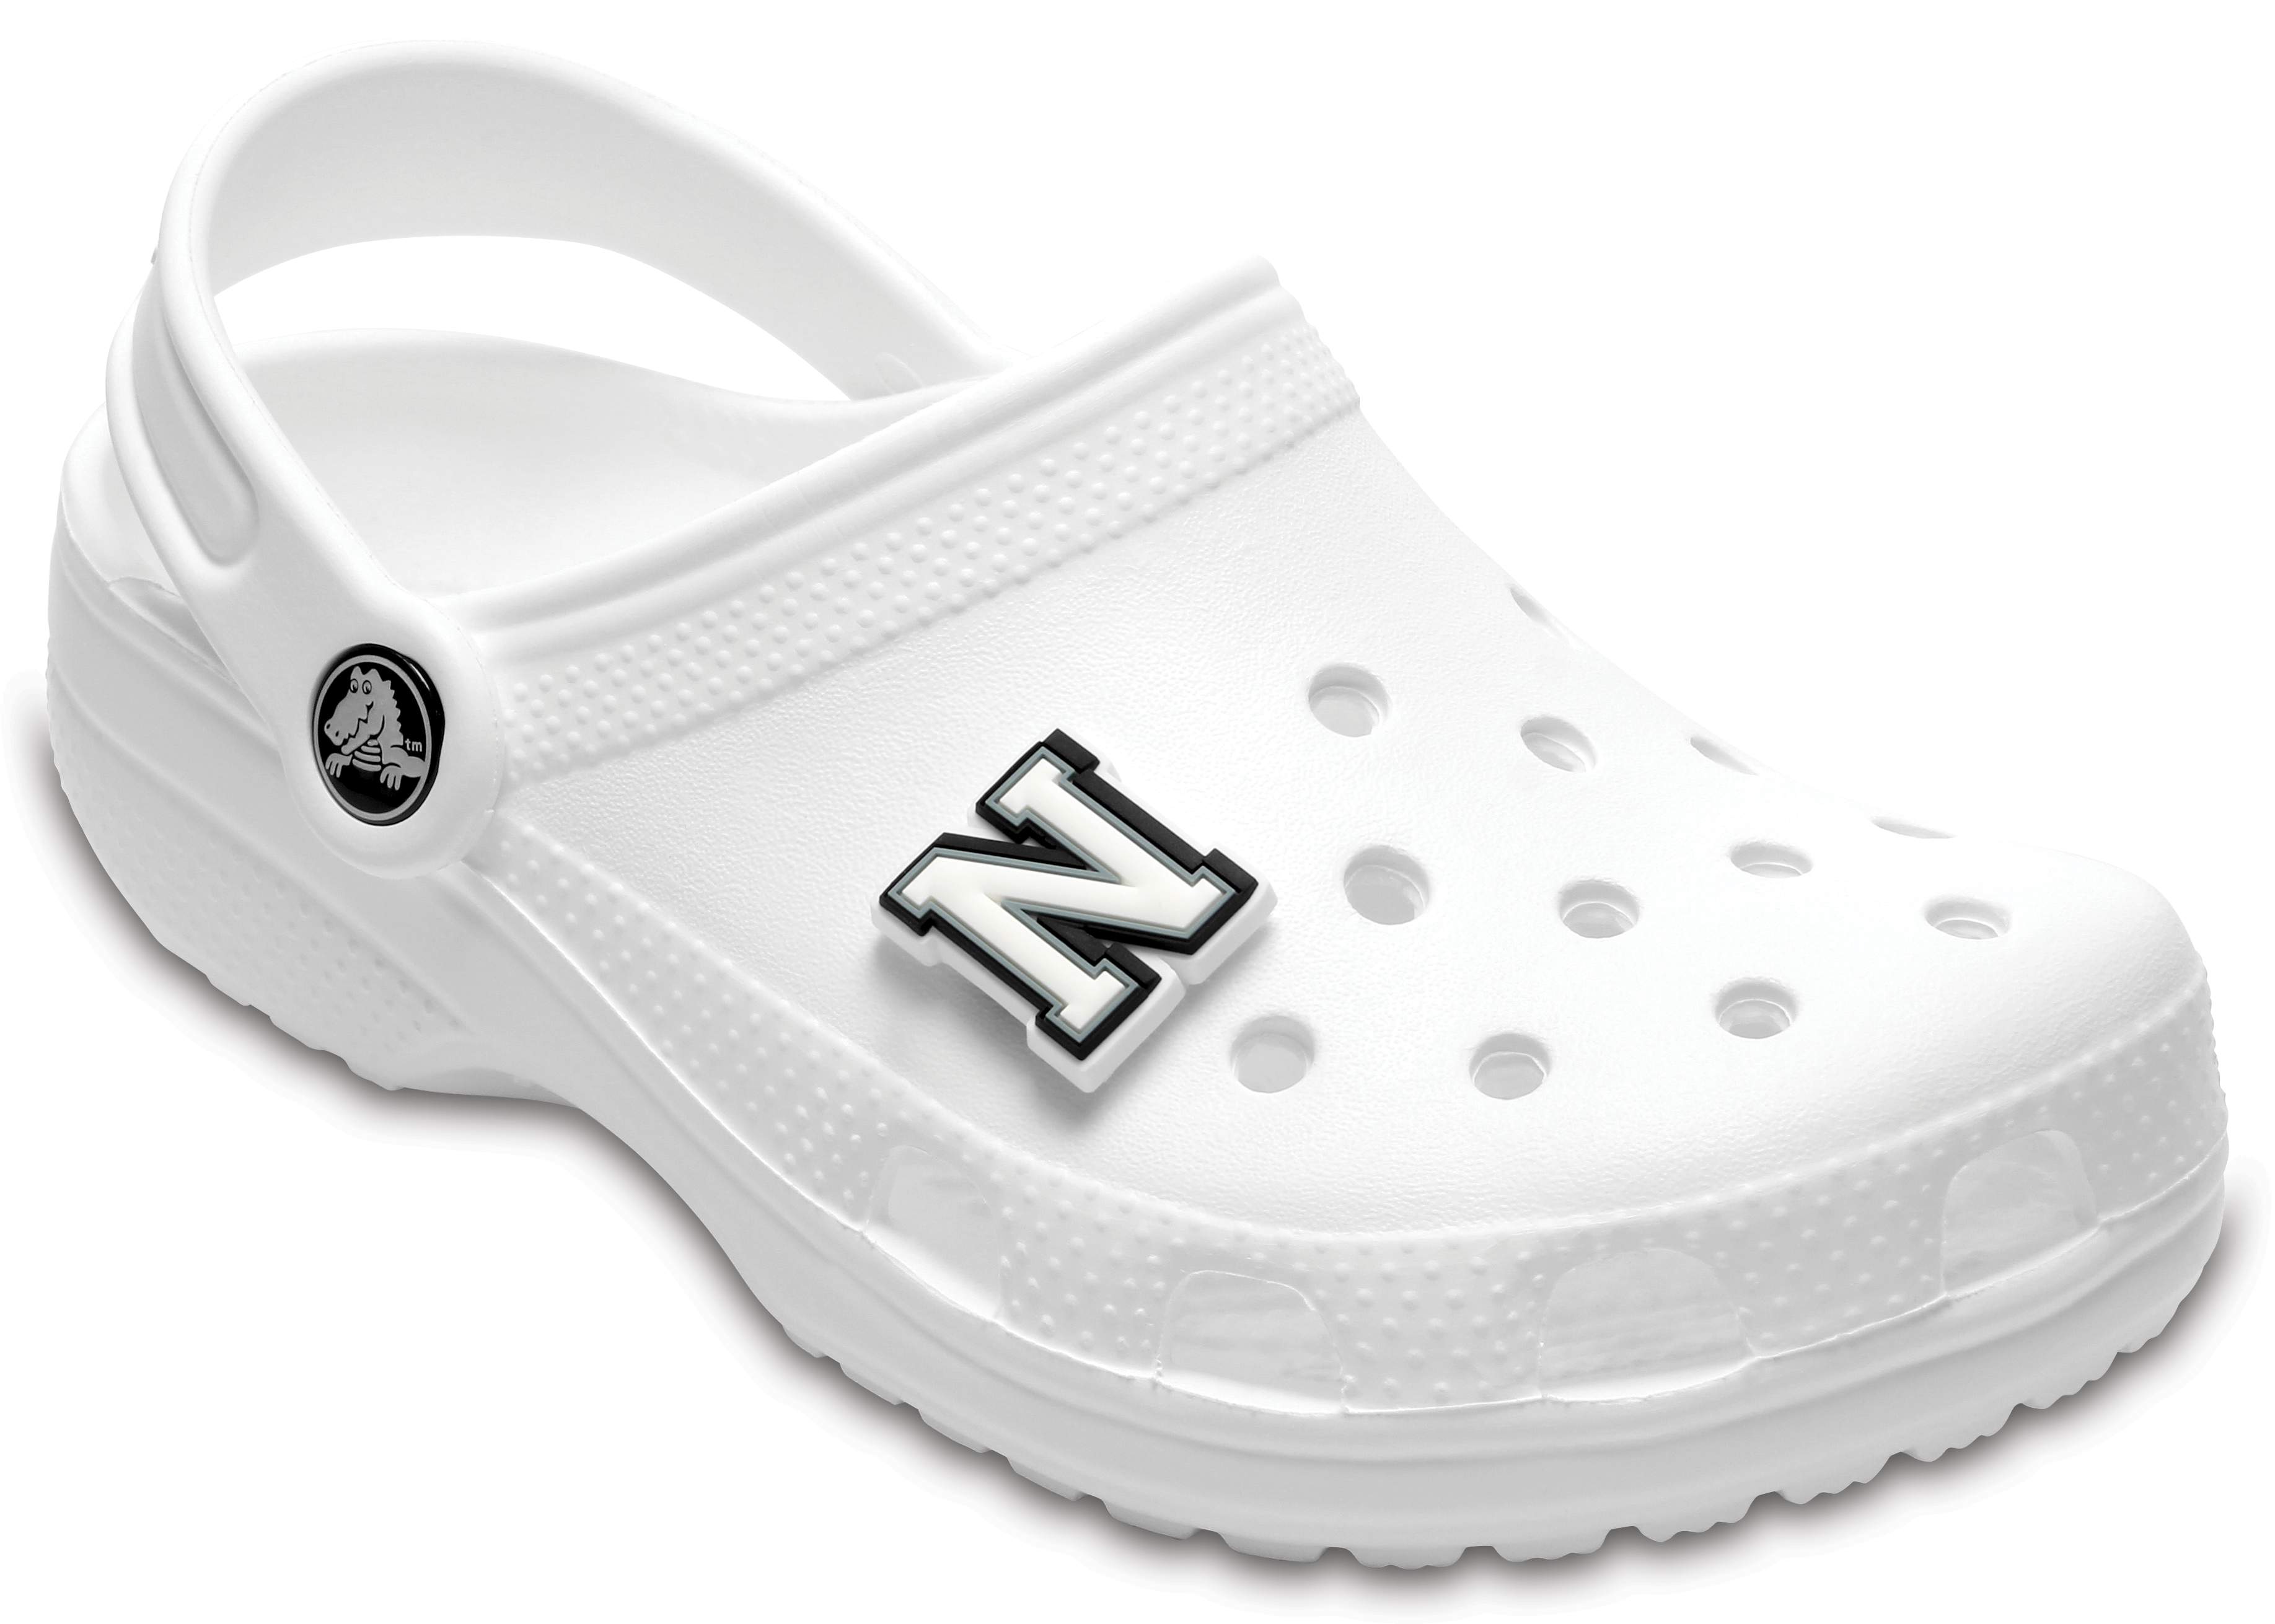 pins for your crocs